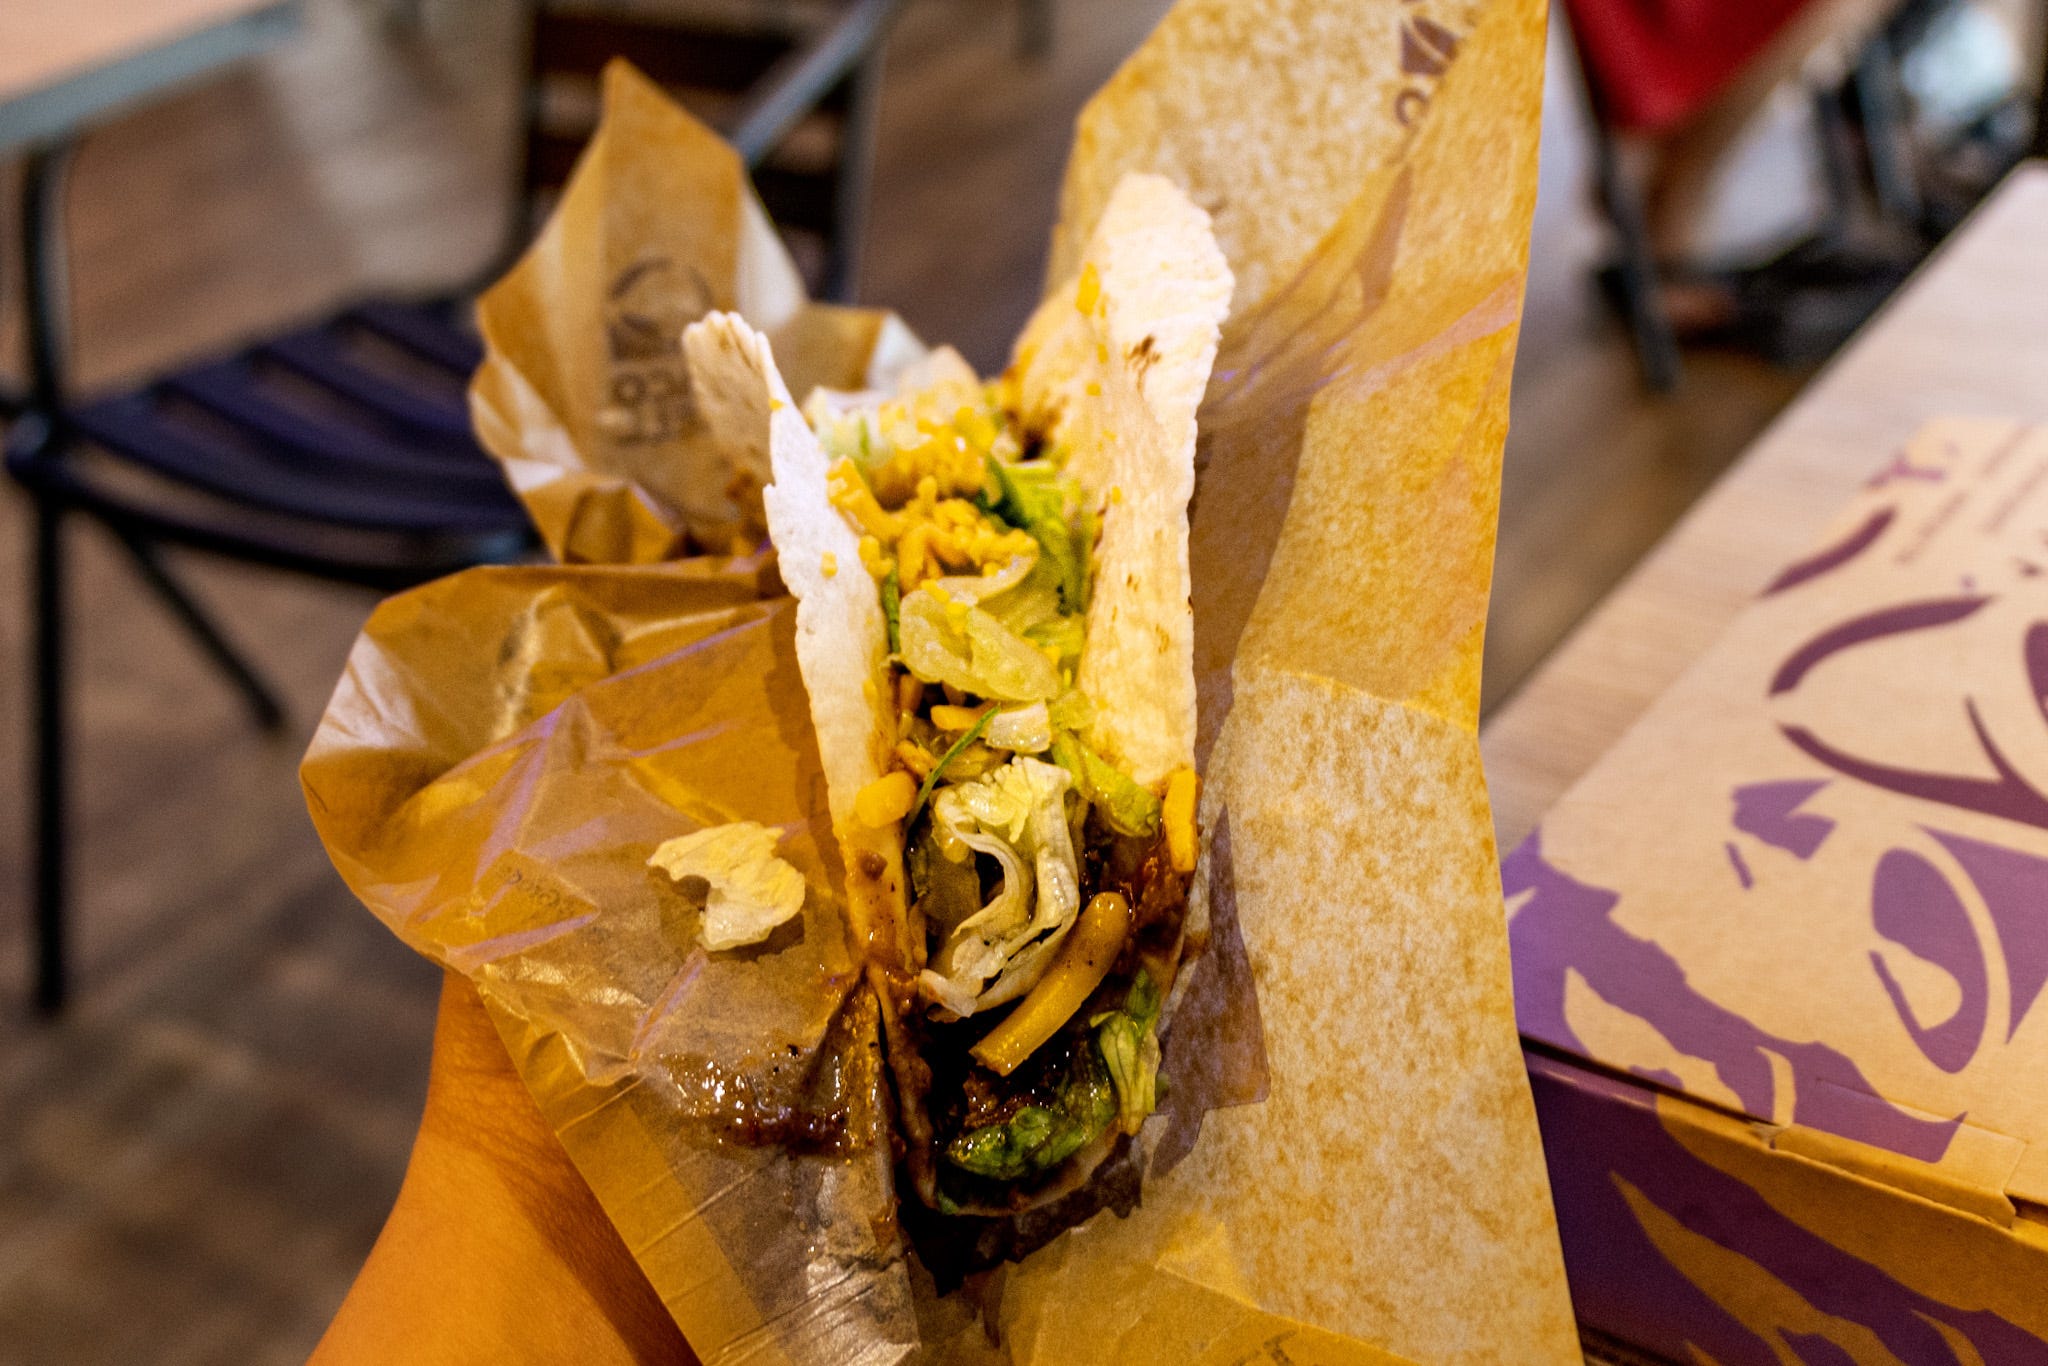 A Taco Bell customer in Colorado who became ill after eating claims he